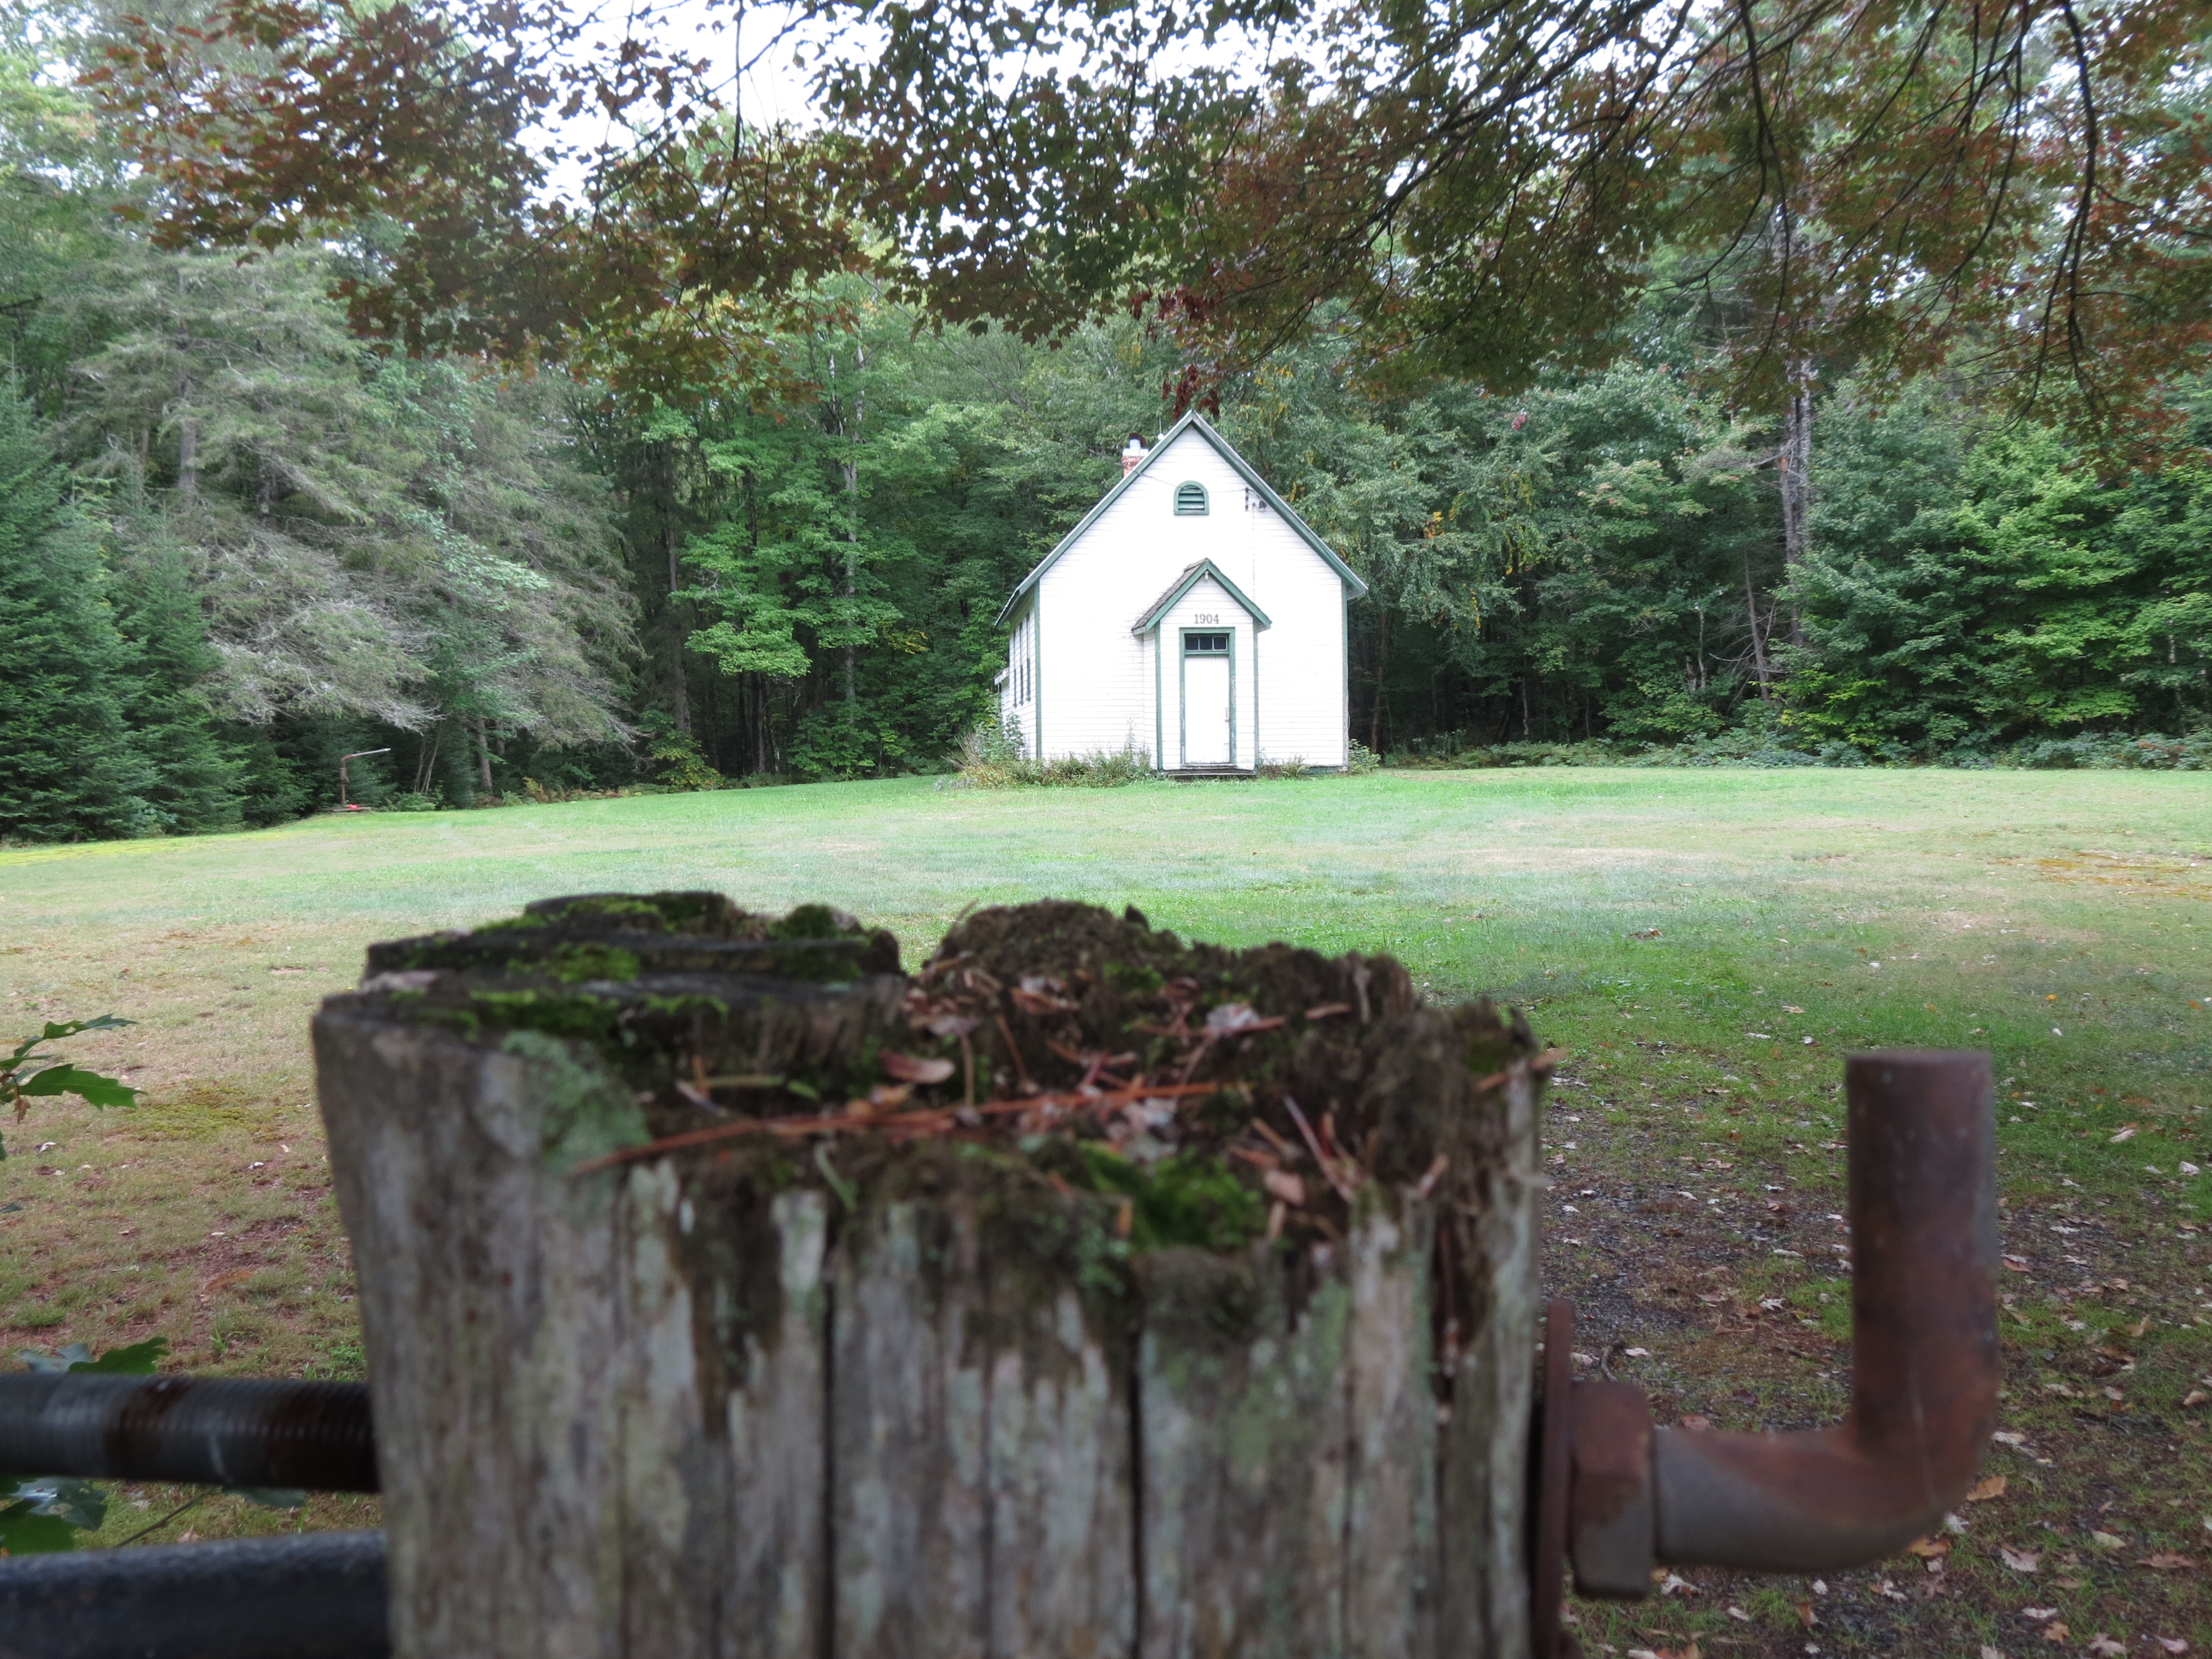 an small white early 1900s schoolhouse, surrounded by thick forest, with a mossy stump in the foreground.